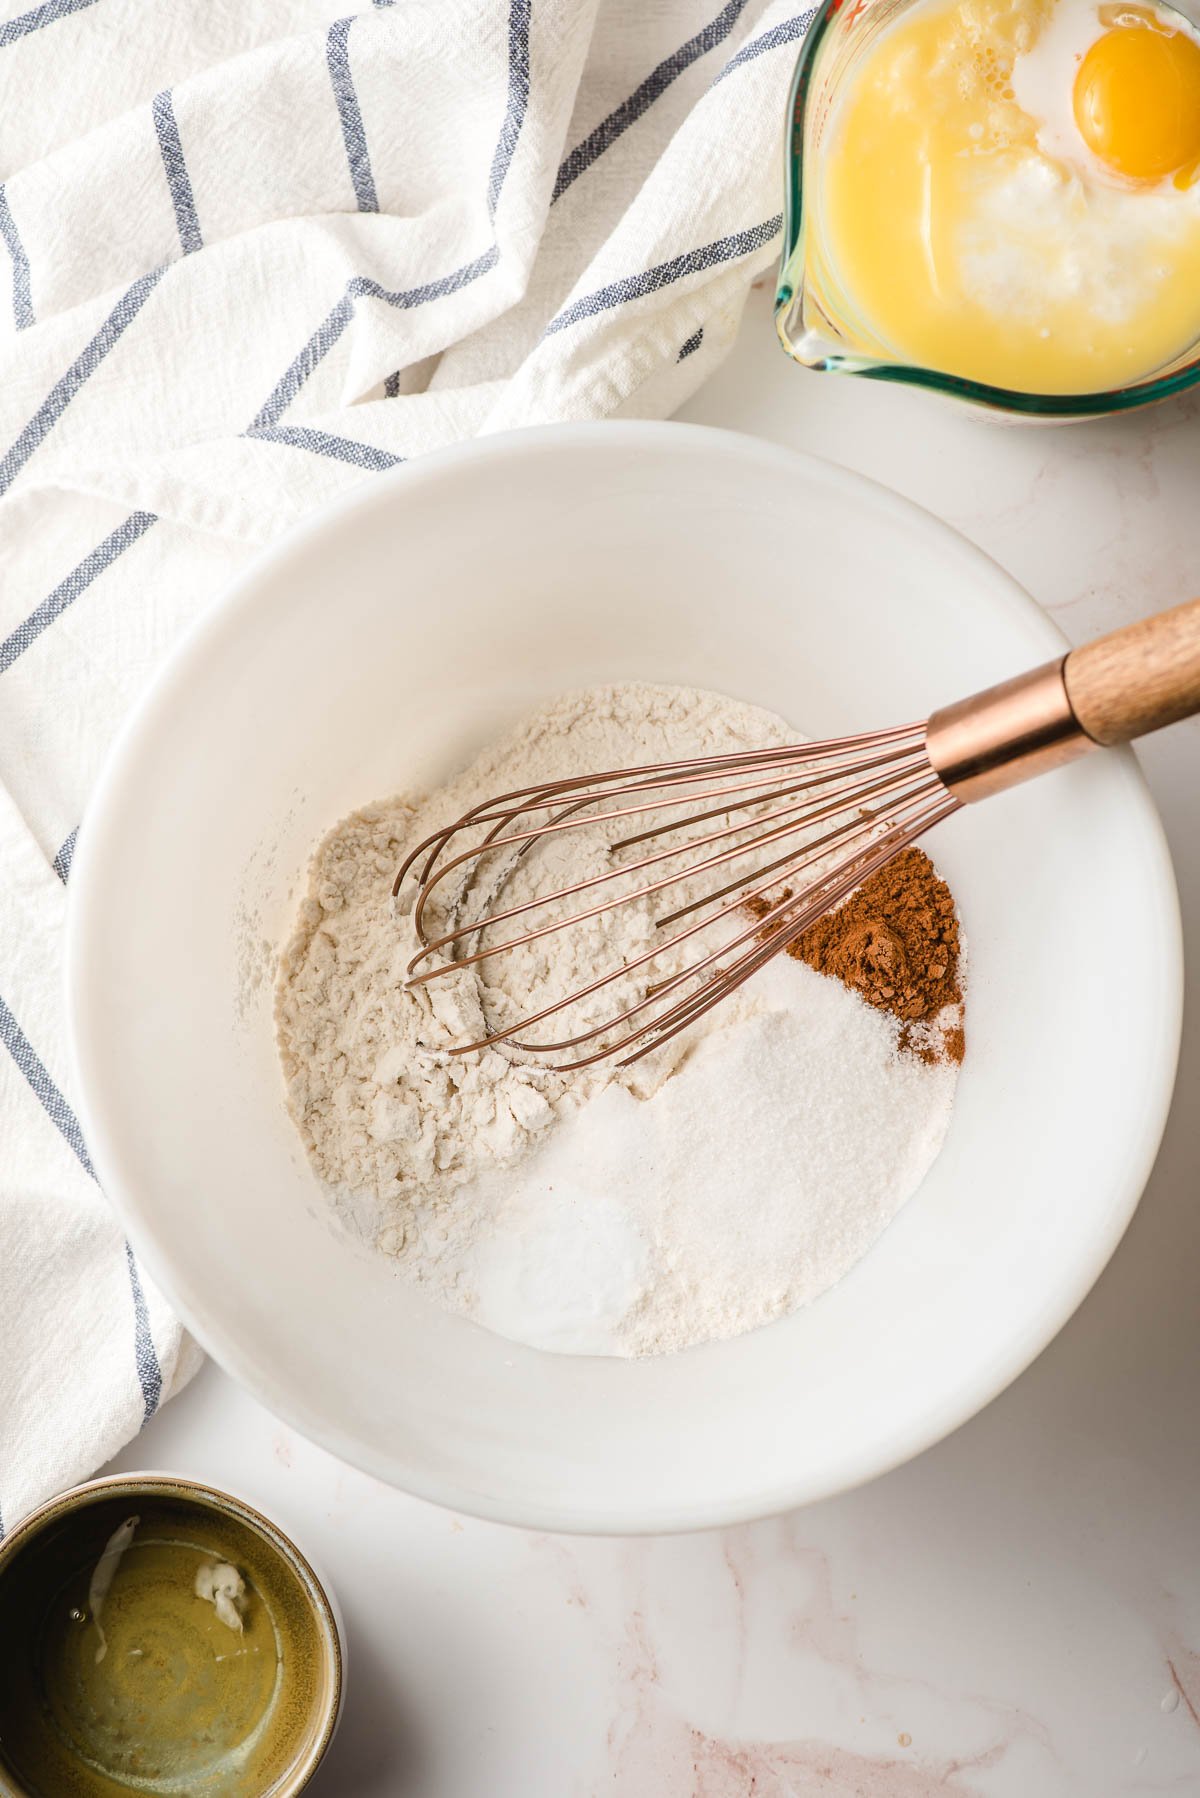 Dry ingredients for pancakes shown in a white bowl with a whisk.